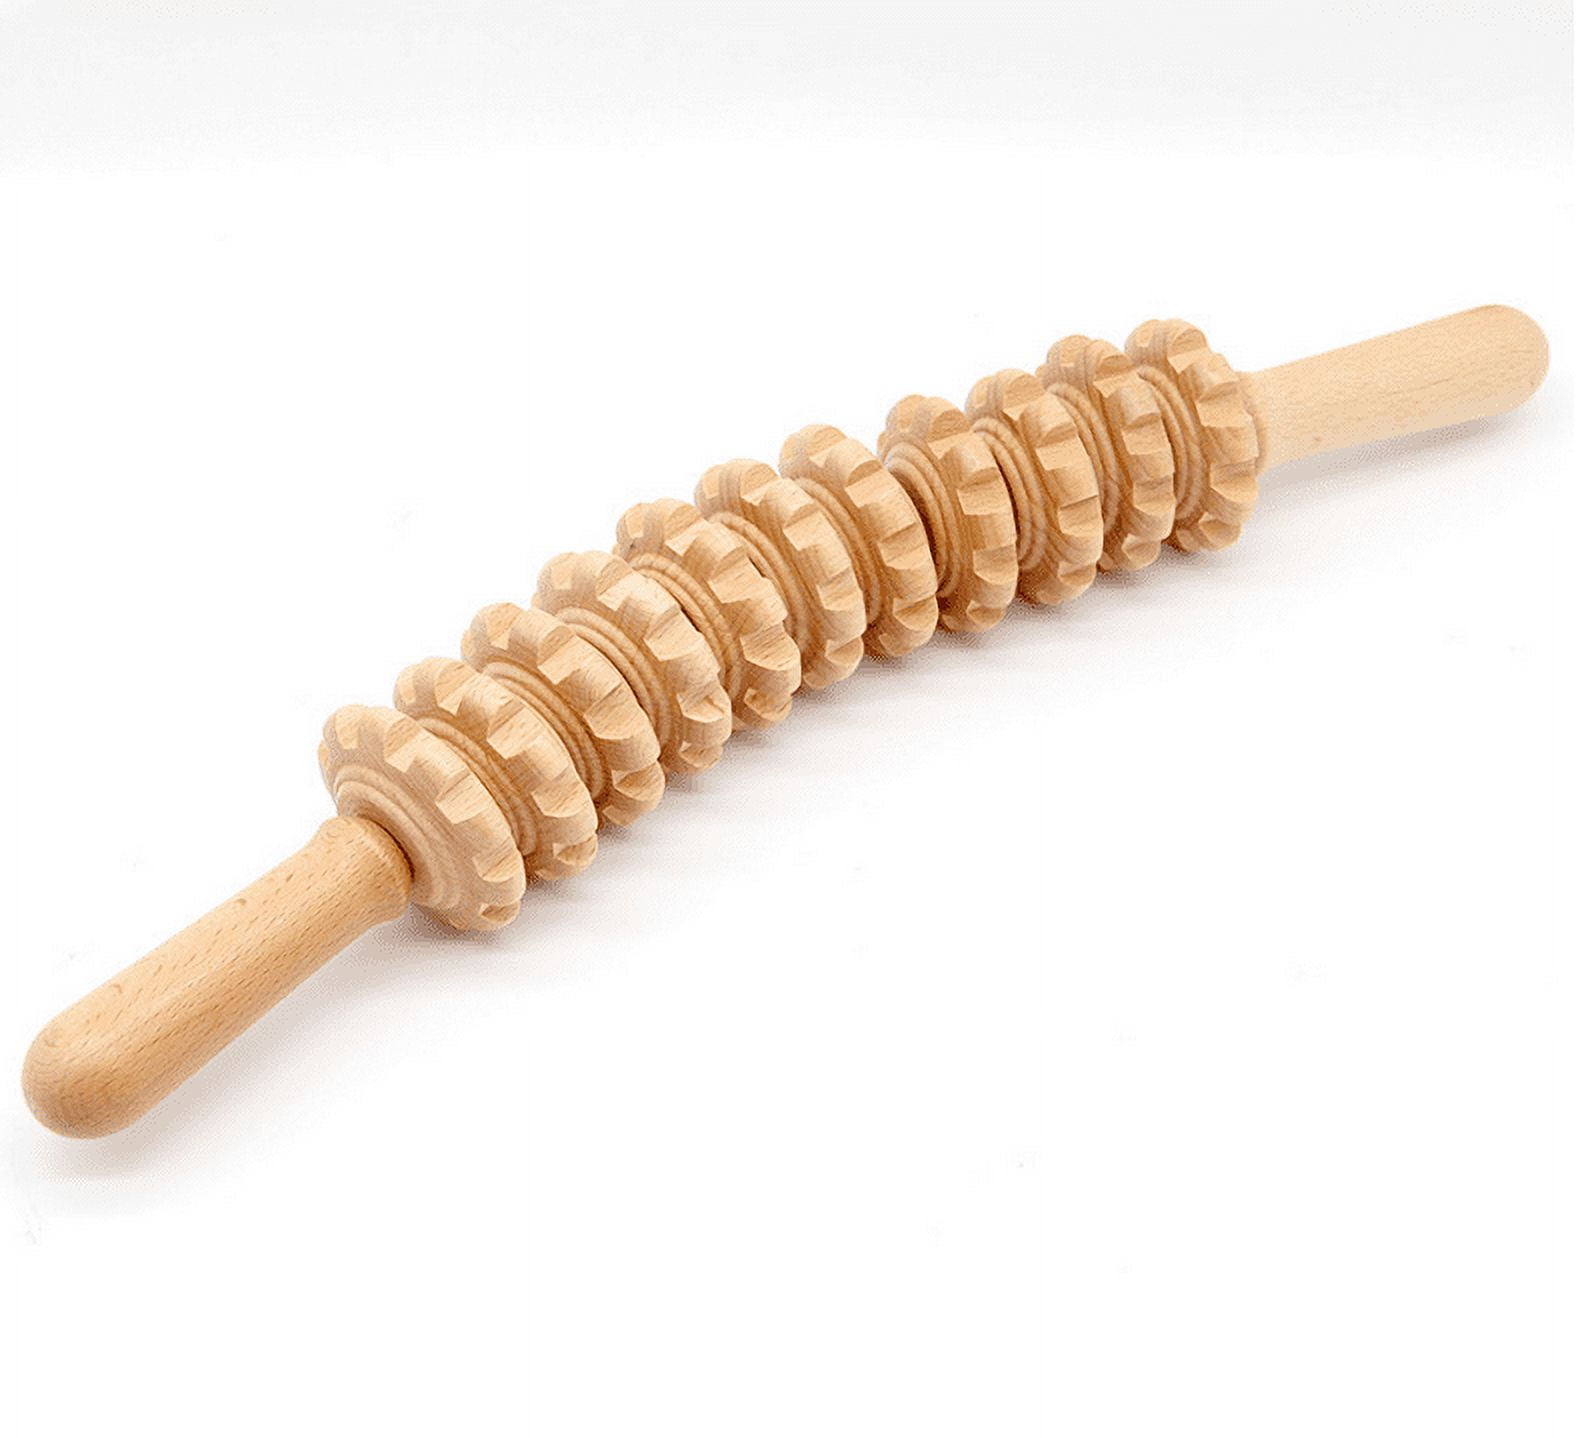 ChainPlus Wood Therapy Curved Roller for Maderoterapia, Lymphatic Drainage, Cellulite  Massage, and Massage Rolling, Natural Muscle Massage Stick Tool for Massage  and Relaxation 